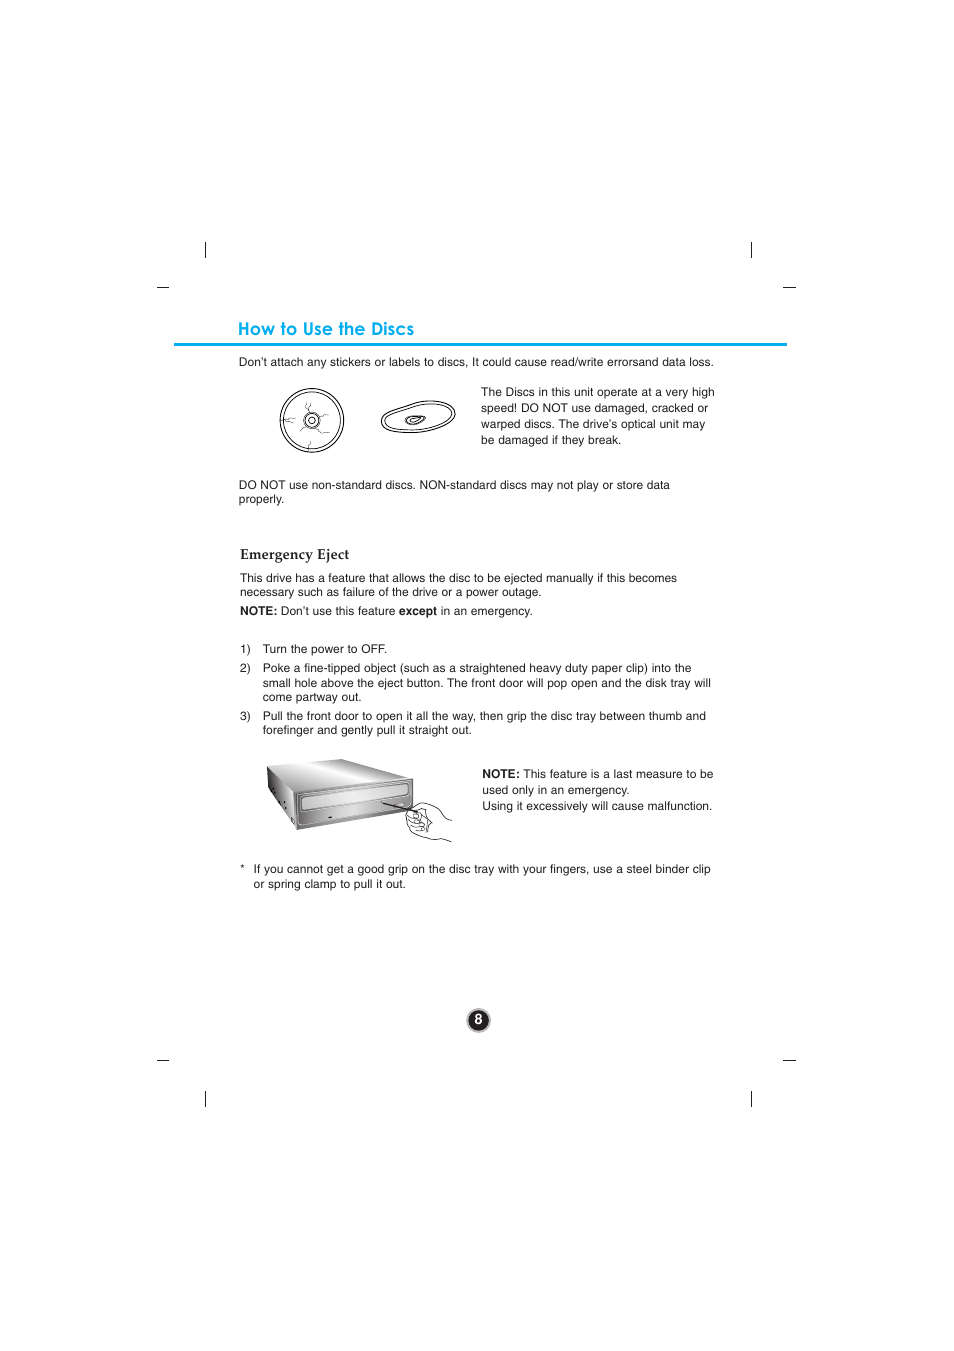 How to use the discs | LG GBC-H20N User Manual | Page 11 / 15